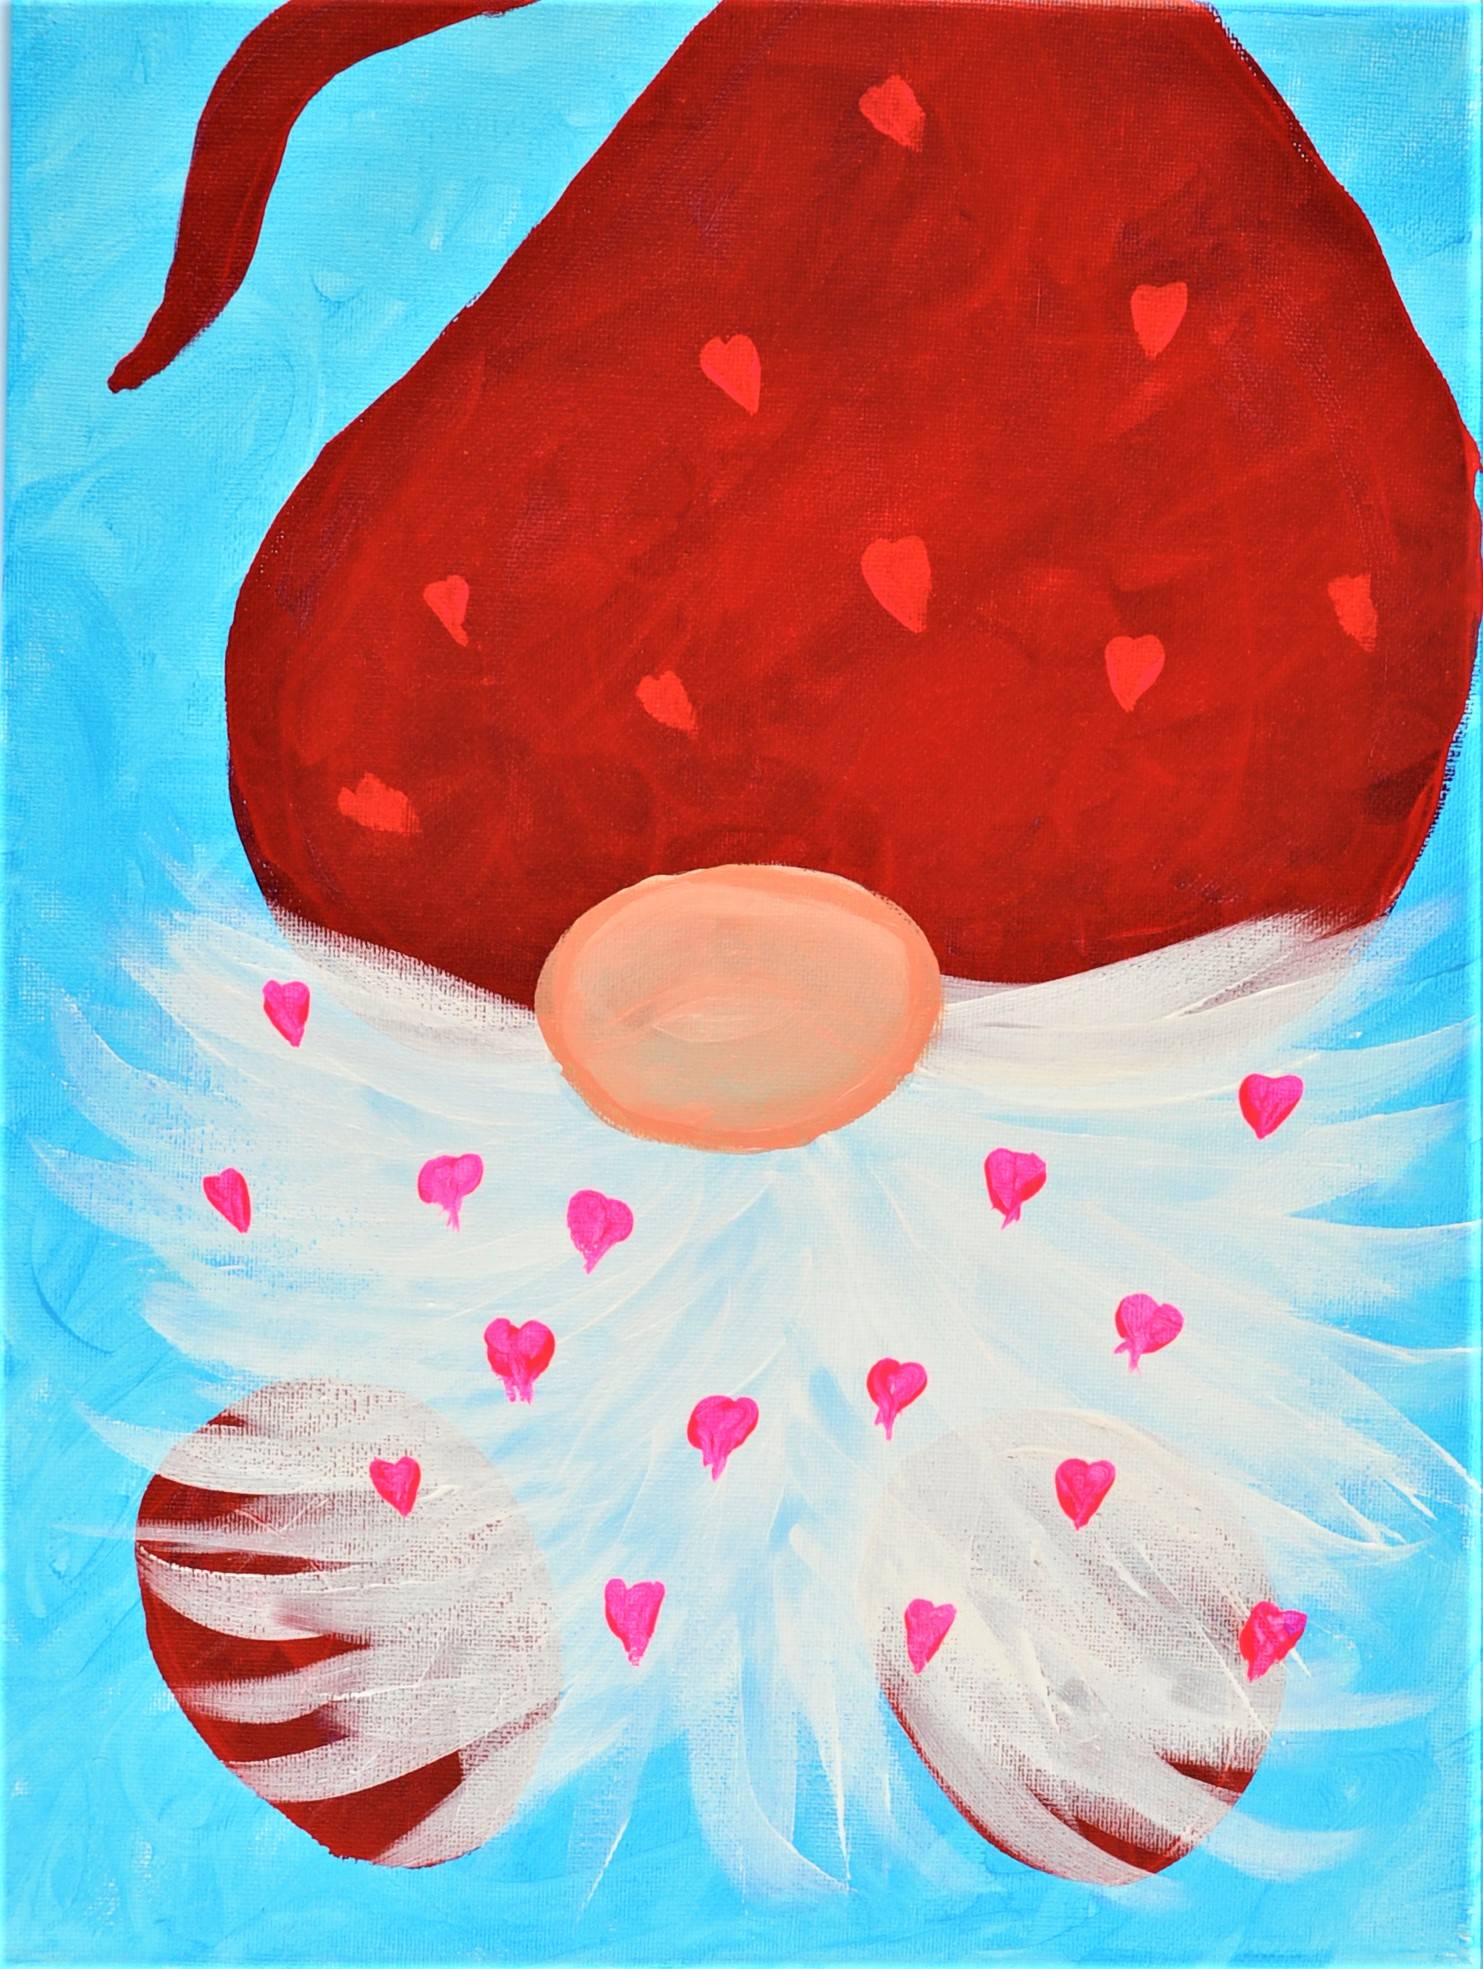 Lovey Dovey Gnome Acrylic | Paint and Sip Kits at Home & Video Lesson ...